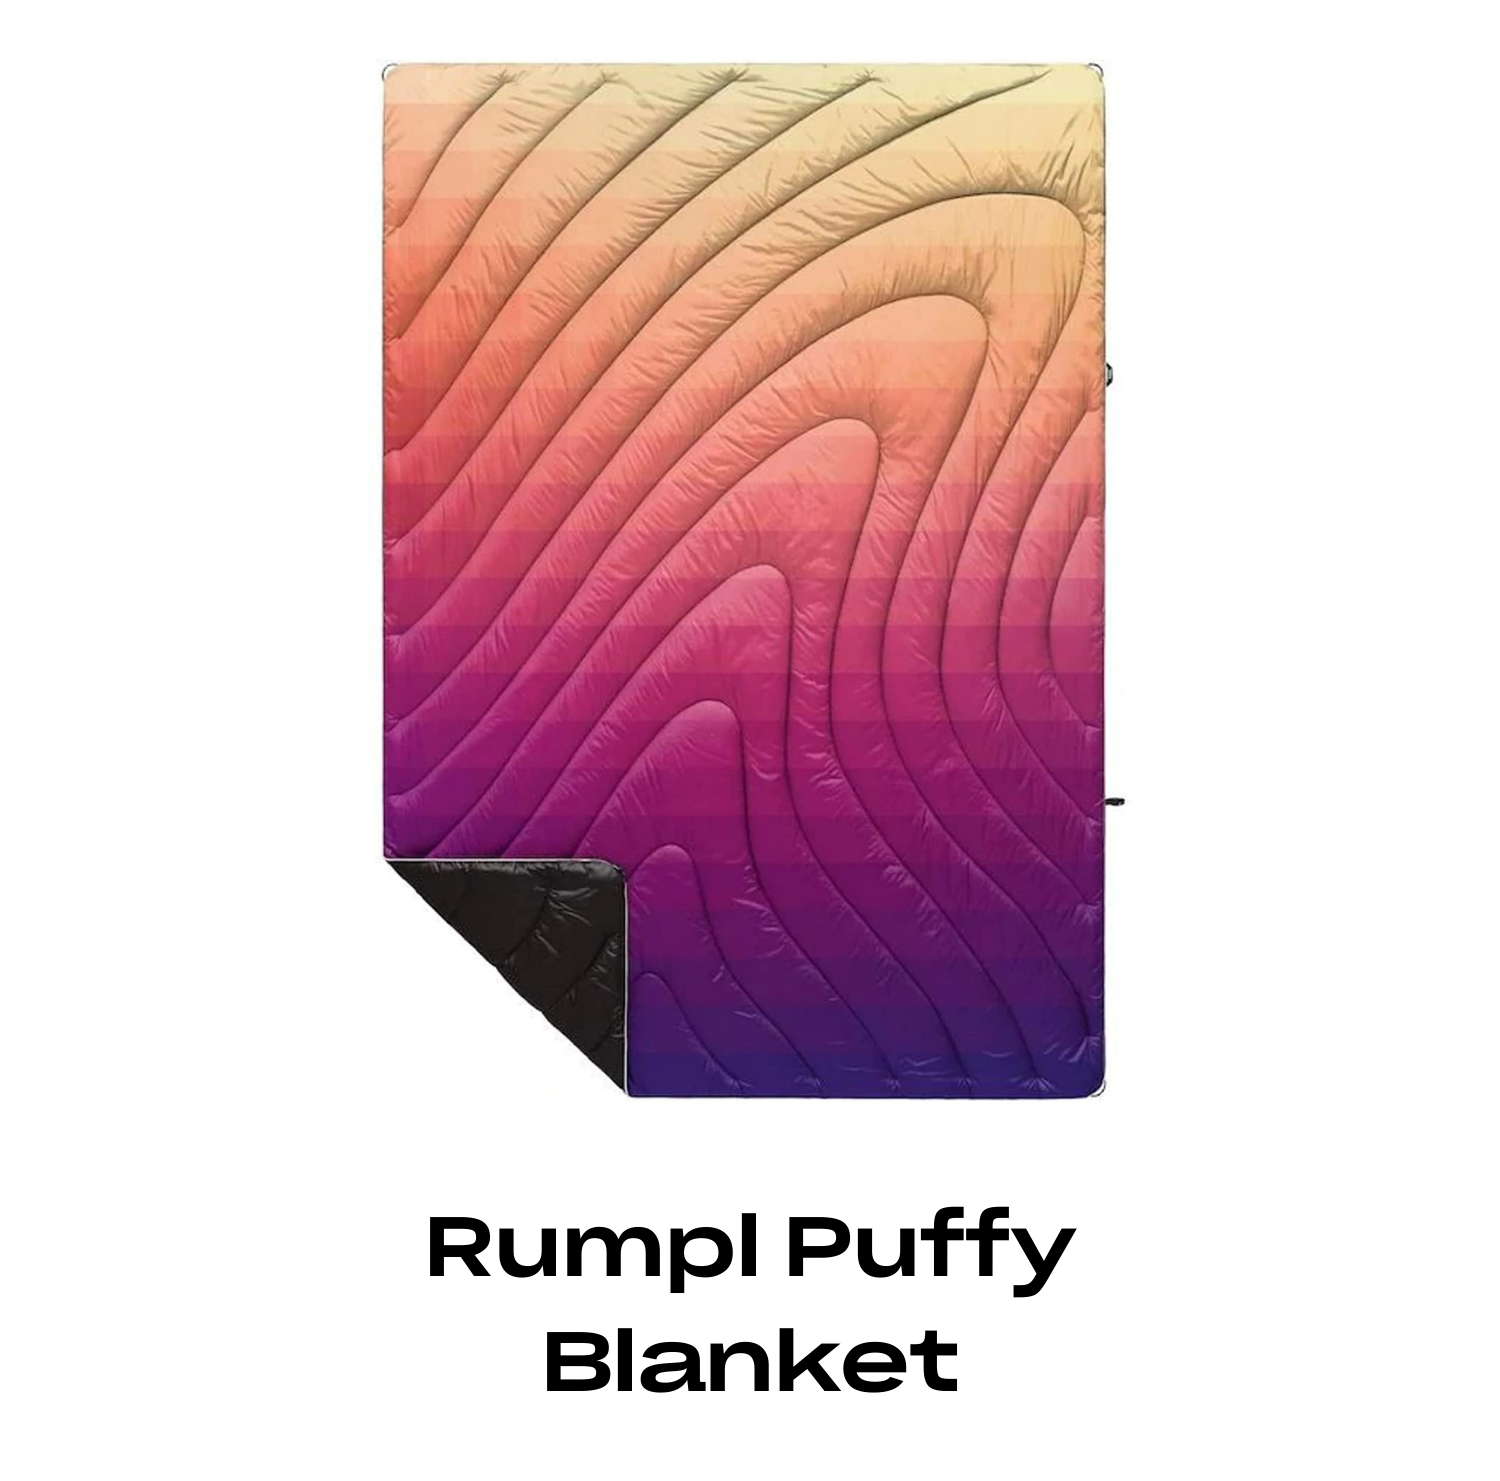 A graphic for a Rumpl puffy blanket, a great mother's day gift.